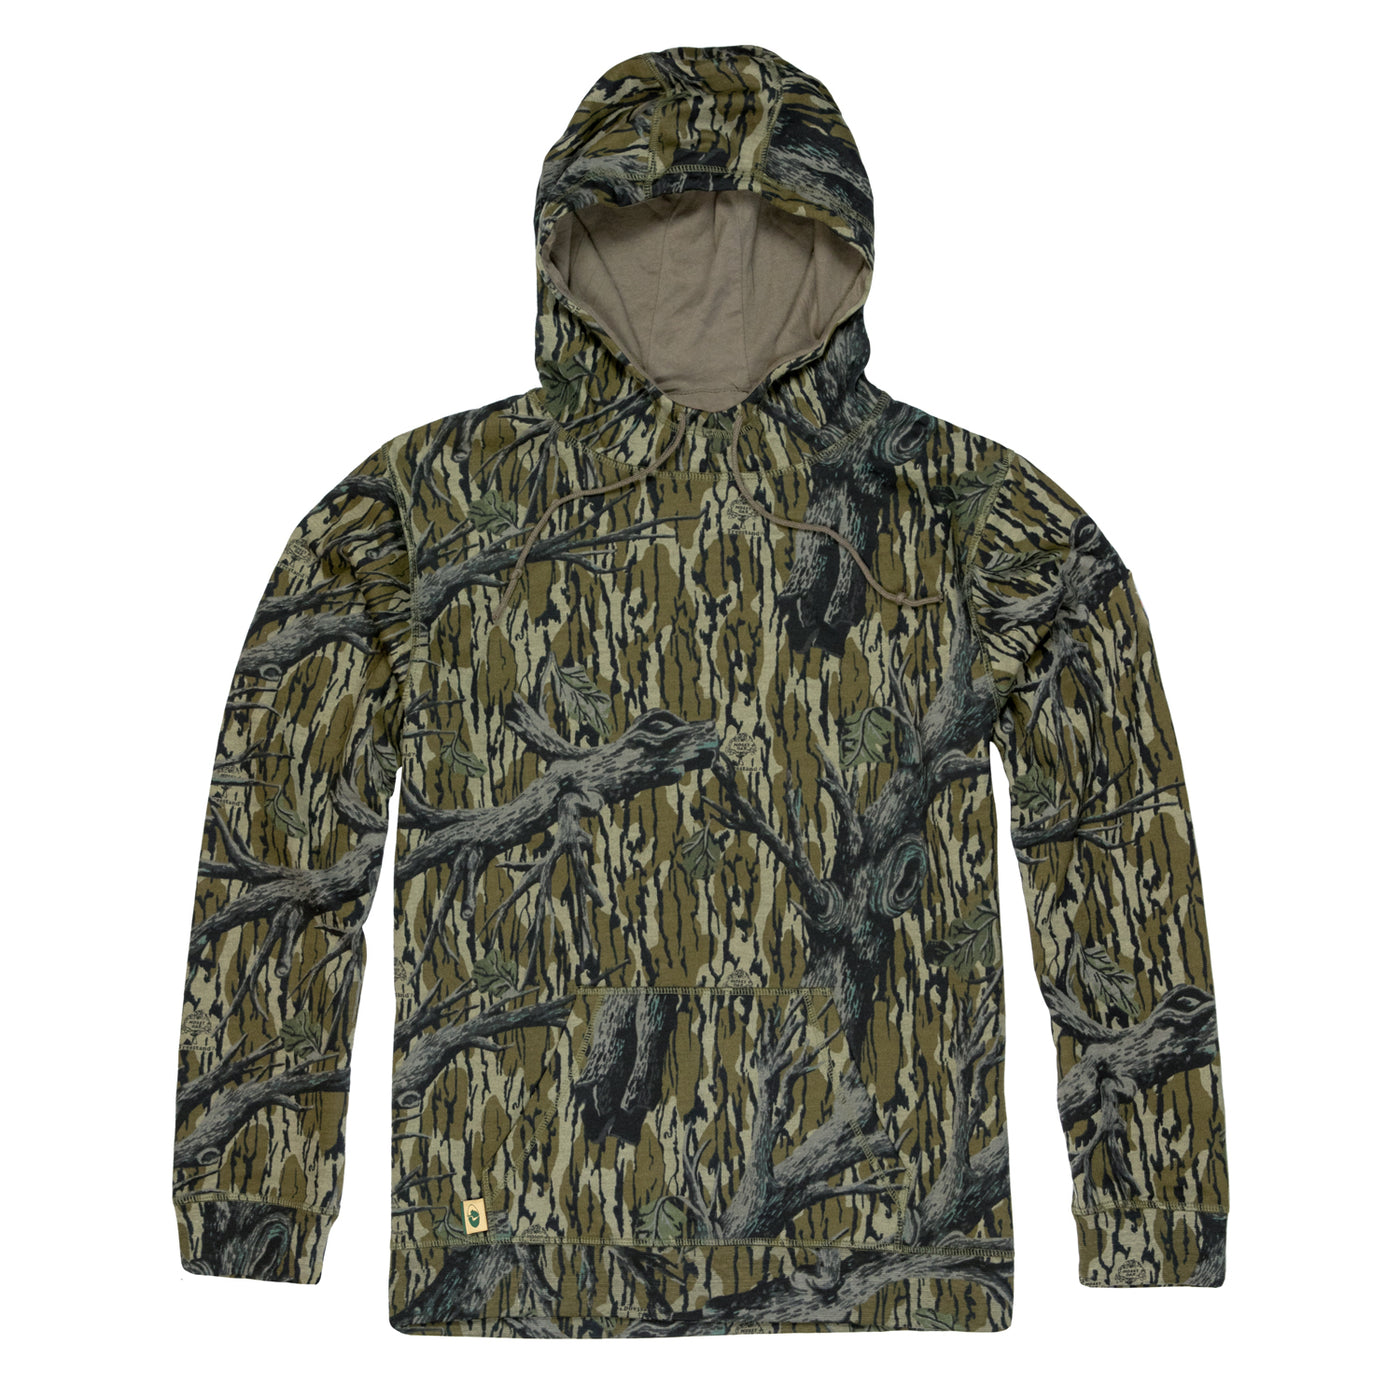 Cotton Mill Vintage Hoodie – The Mossy Oak Store